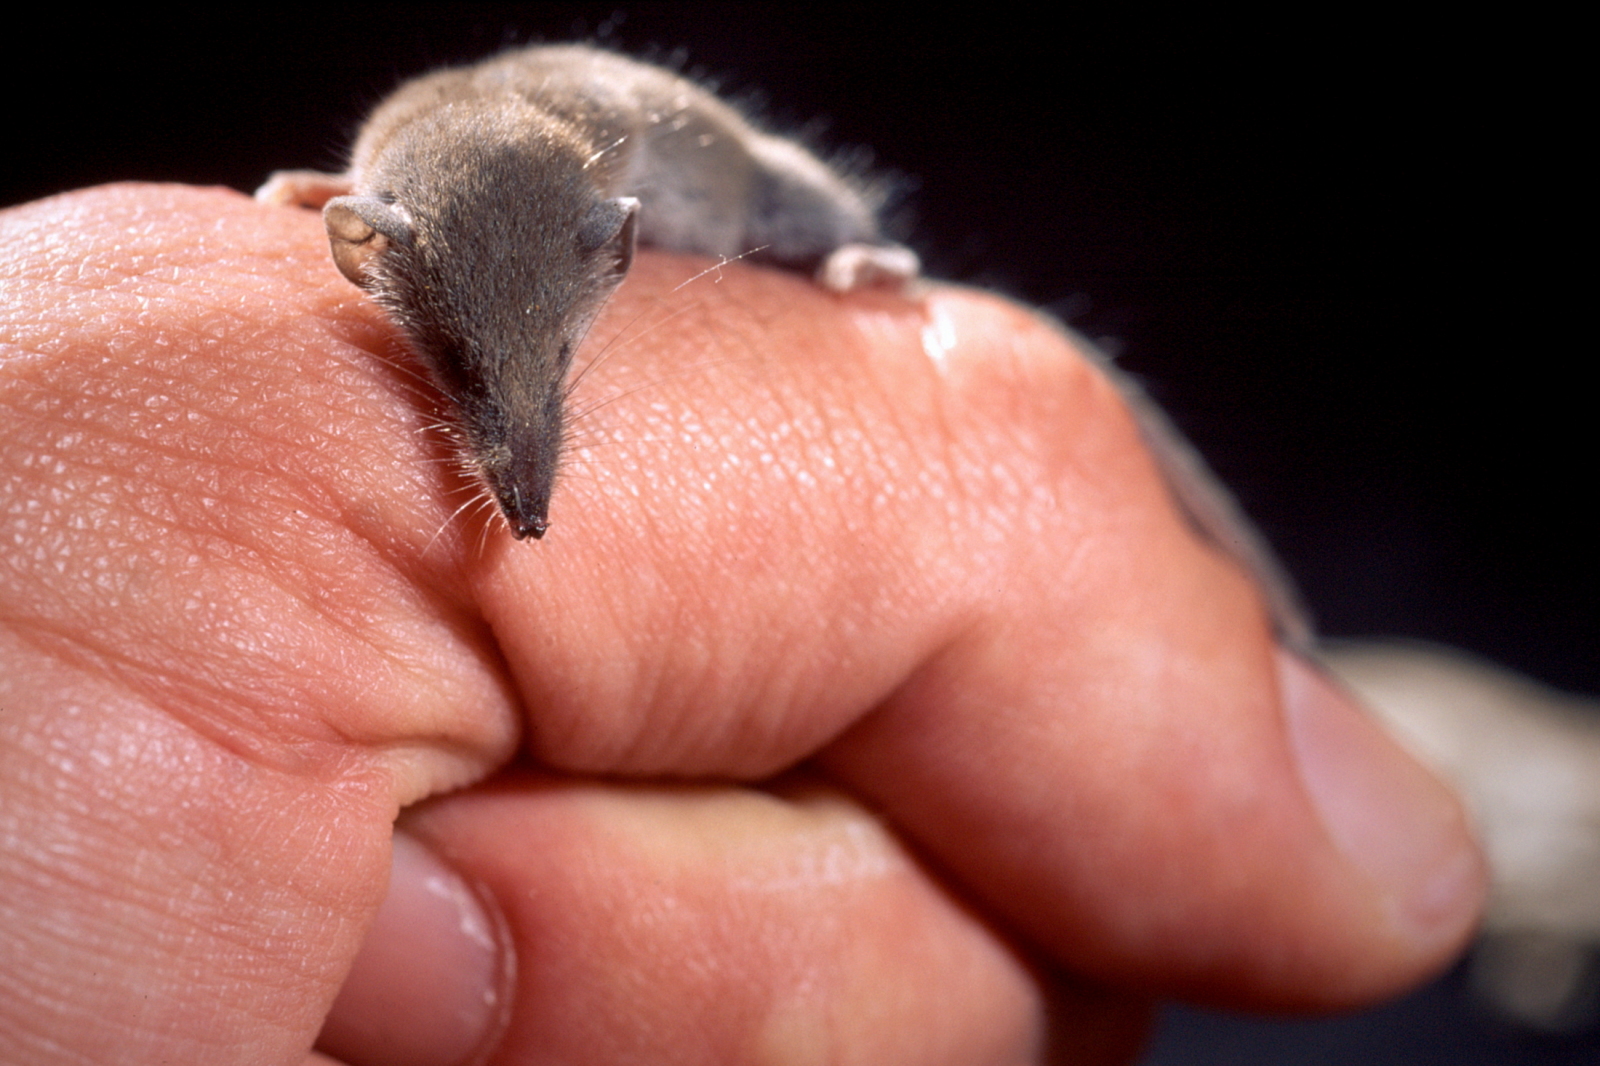 Where is the smallest mammal in the world?